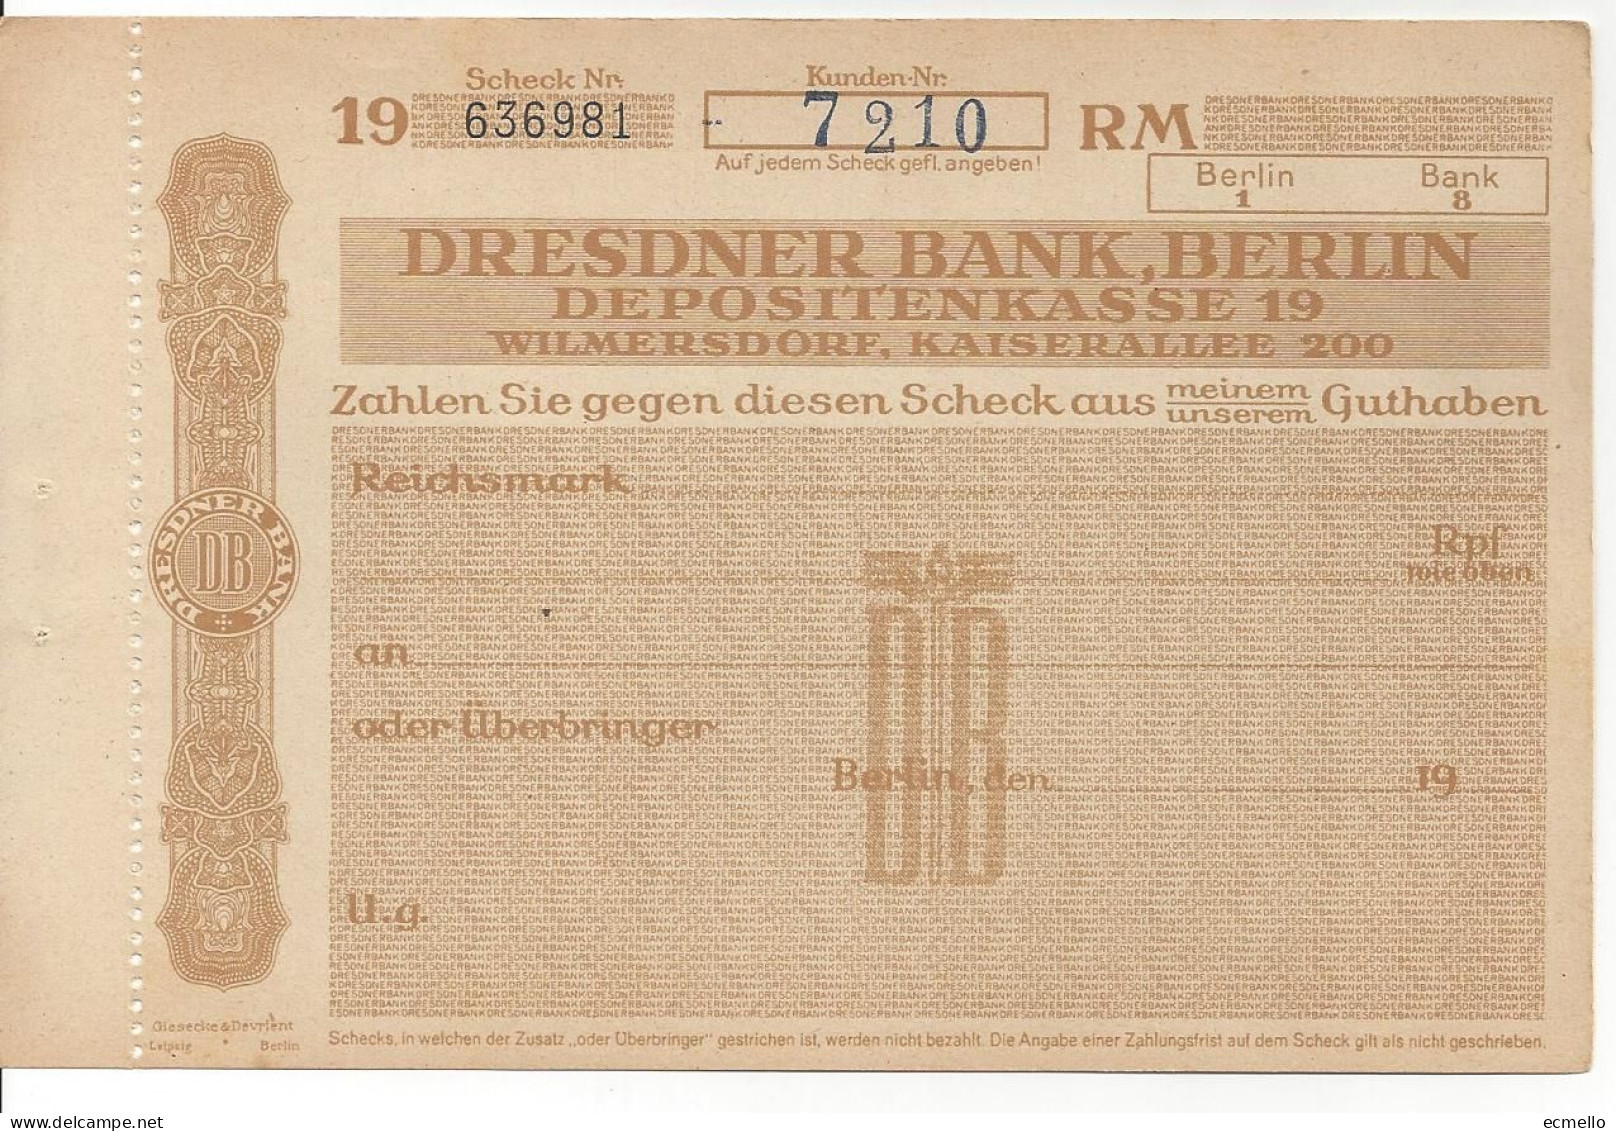 GERMANY CHEQUE CHECK DRESDNER BANK, BERLIN, 1930'S SCARCE - Cheques & Traveler's Cheques